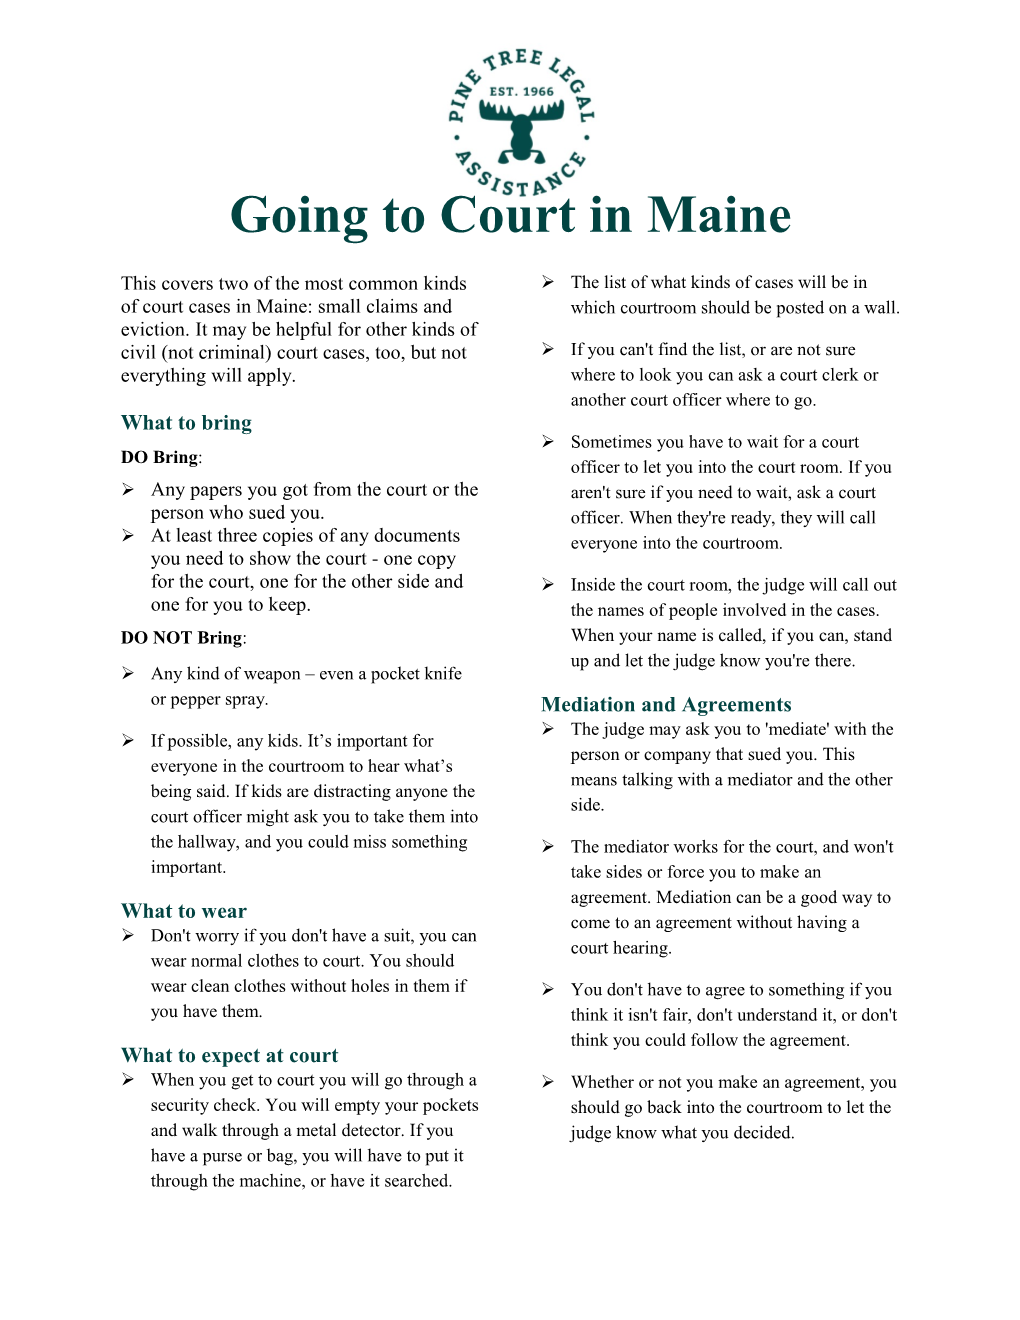 Going to Court in Maine